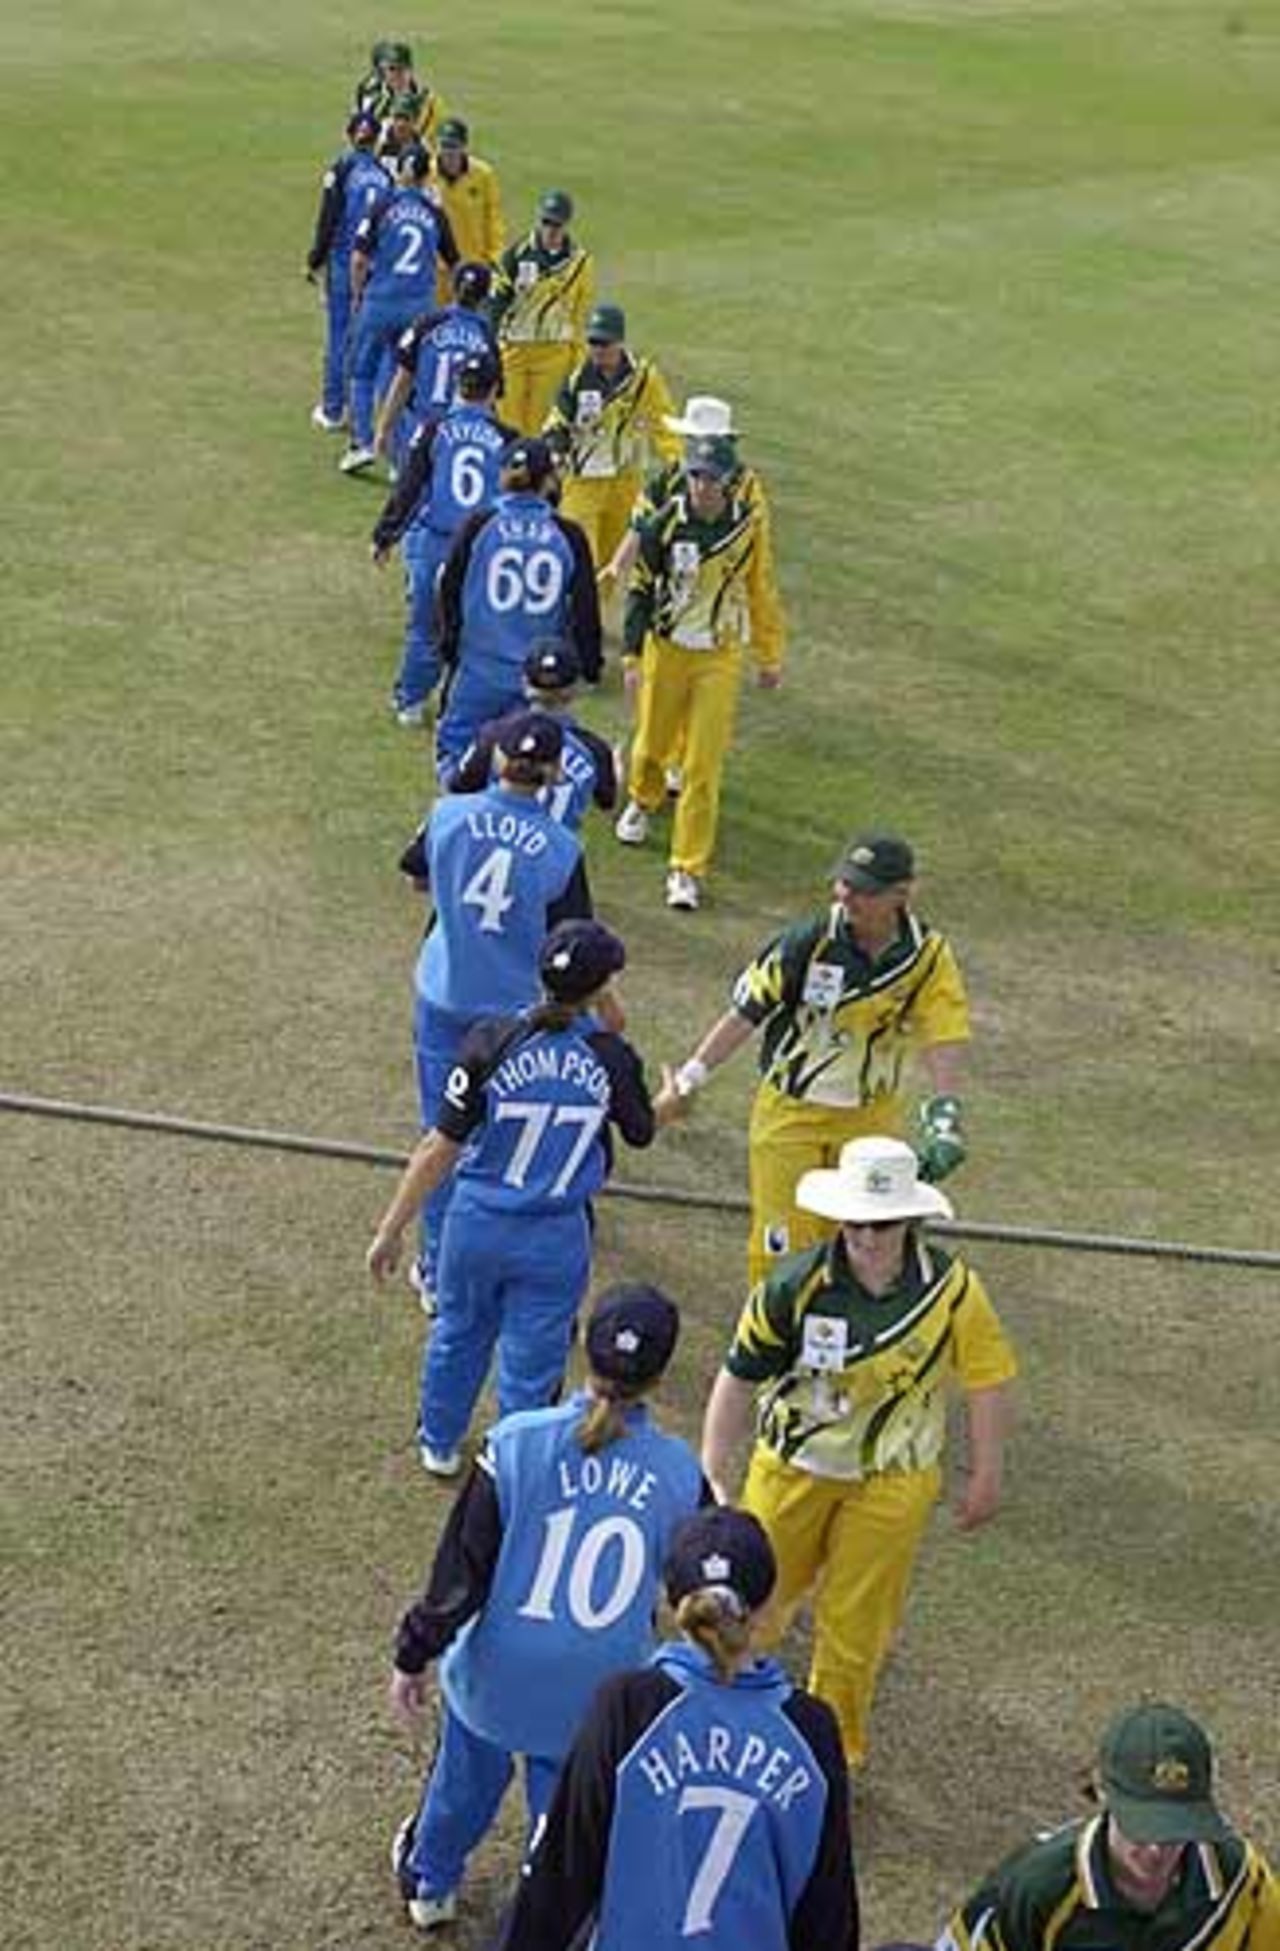 The players greet each other at the end of the match